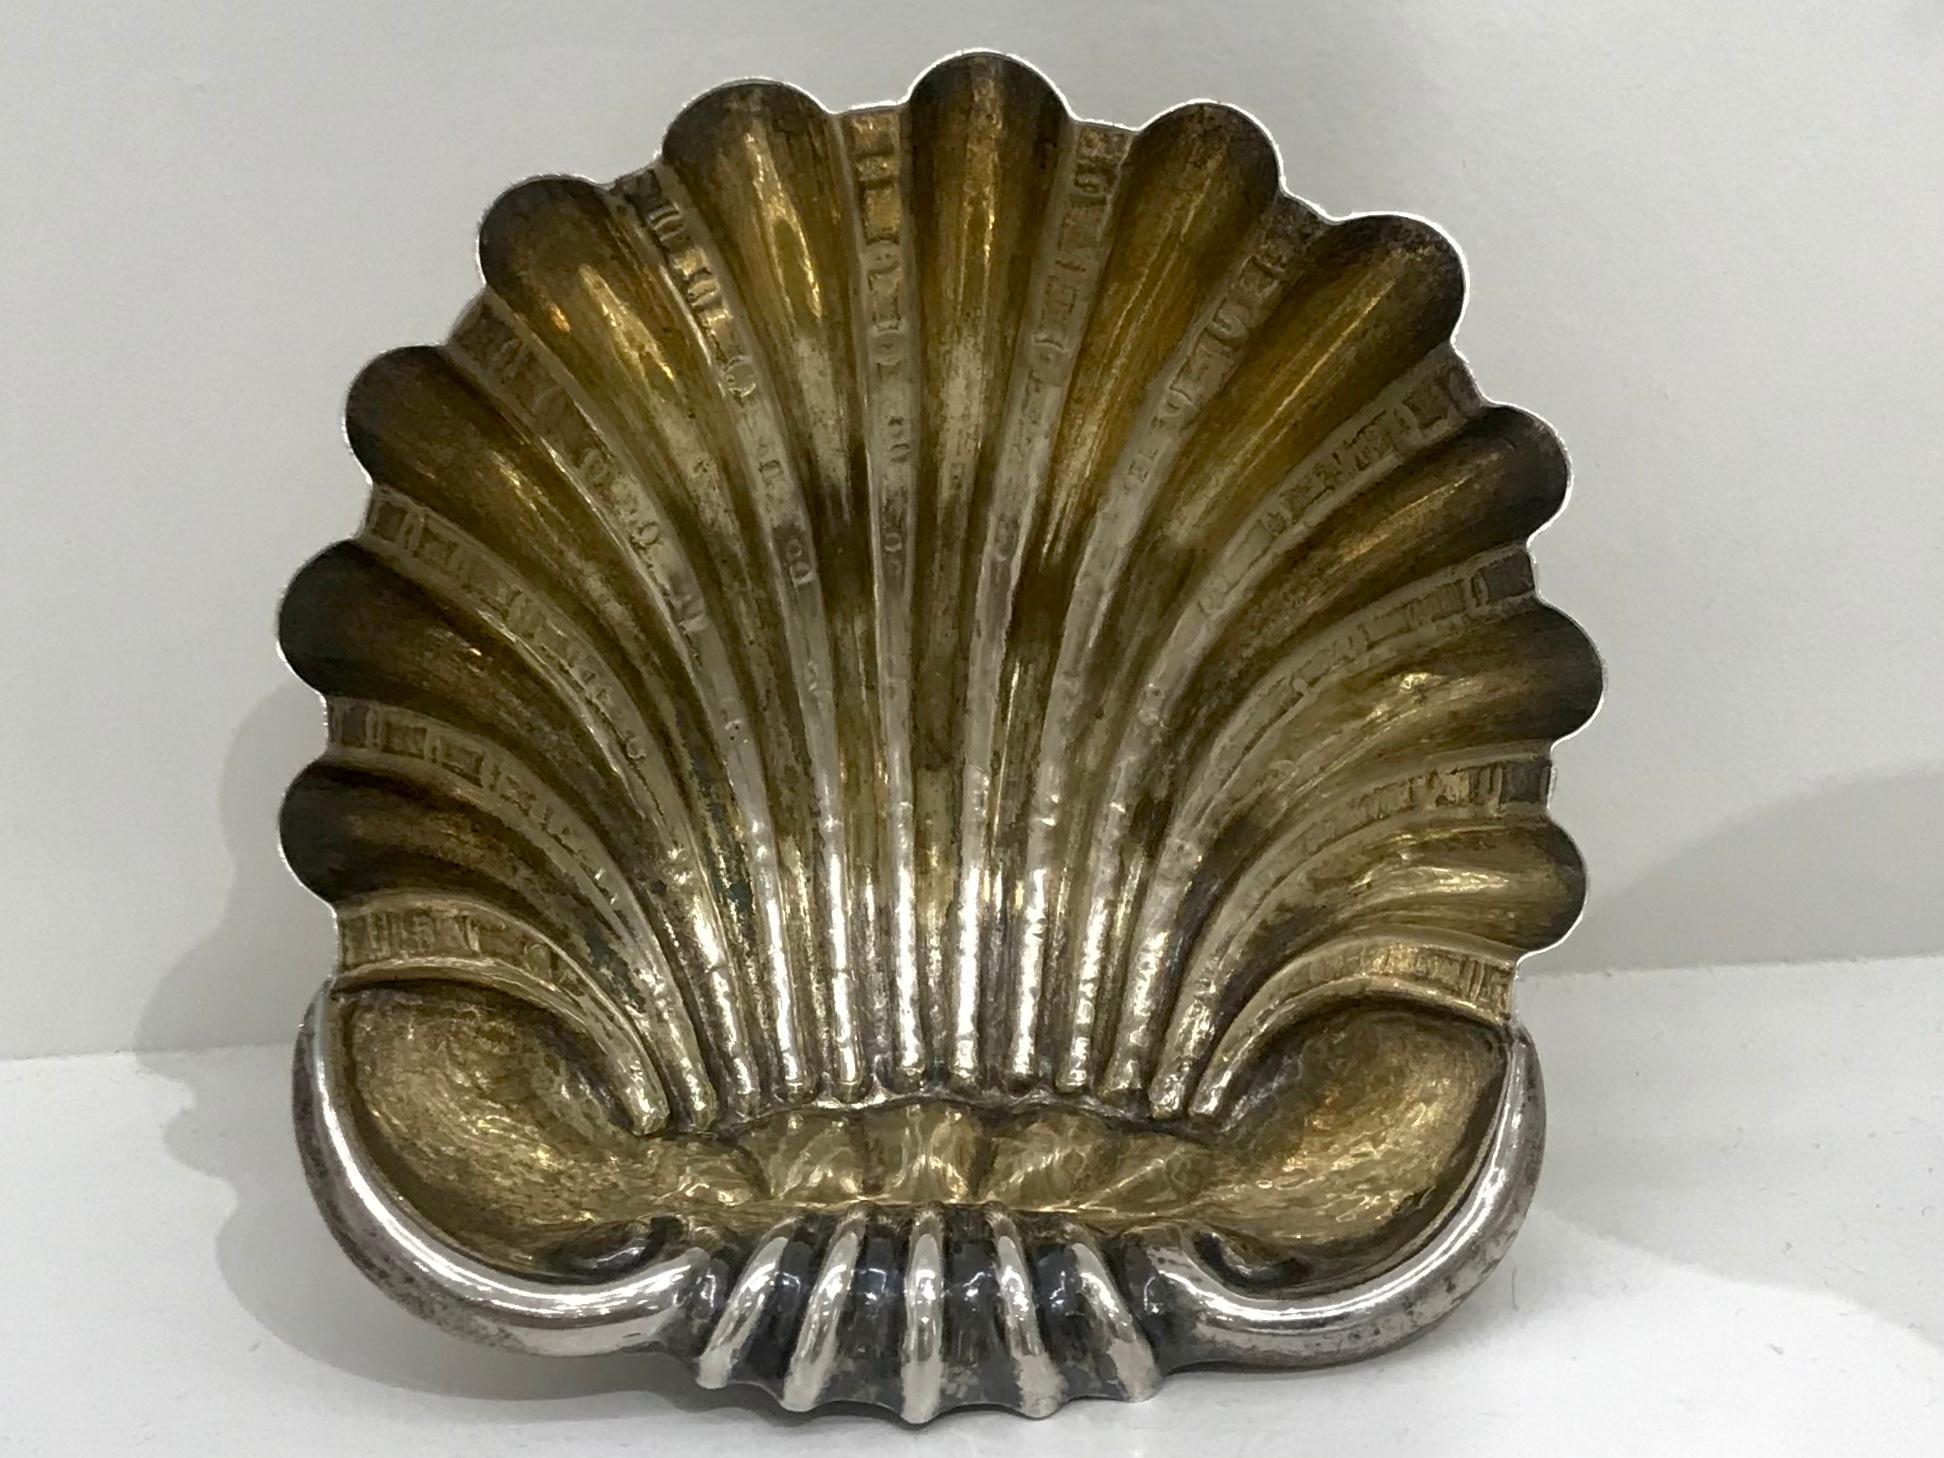 Italian silver and vermeil shell dish. Vermeil wash rocaille form dish on shell feet in the manner of Missiaglia, Italy, circa 1940.
Dimension: 5.88